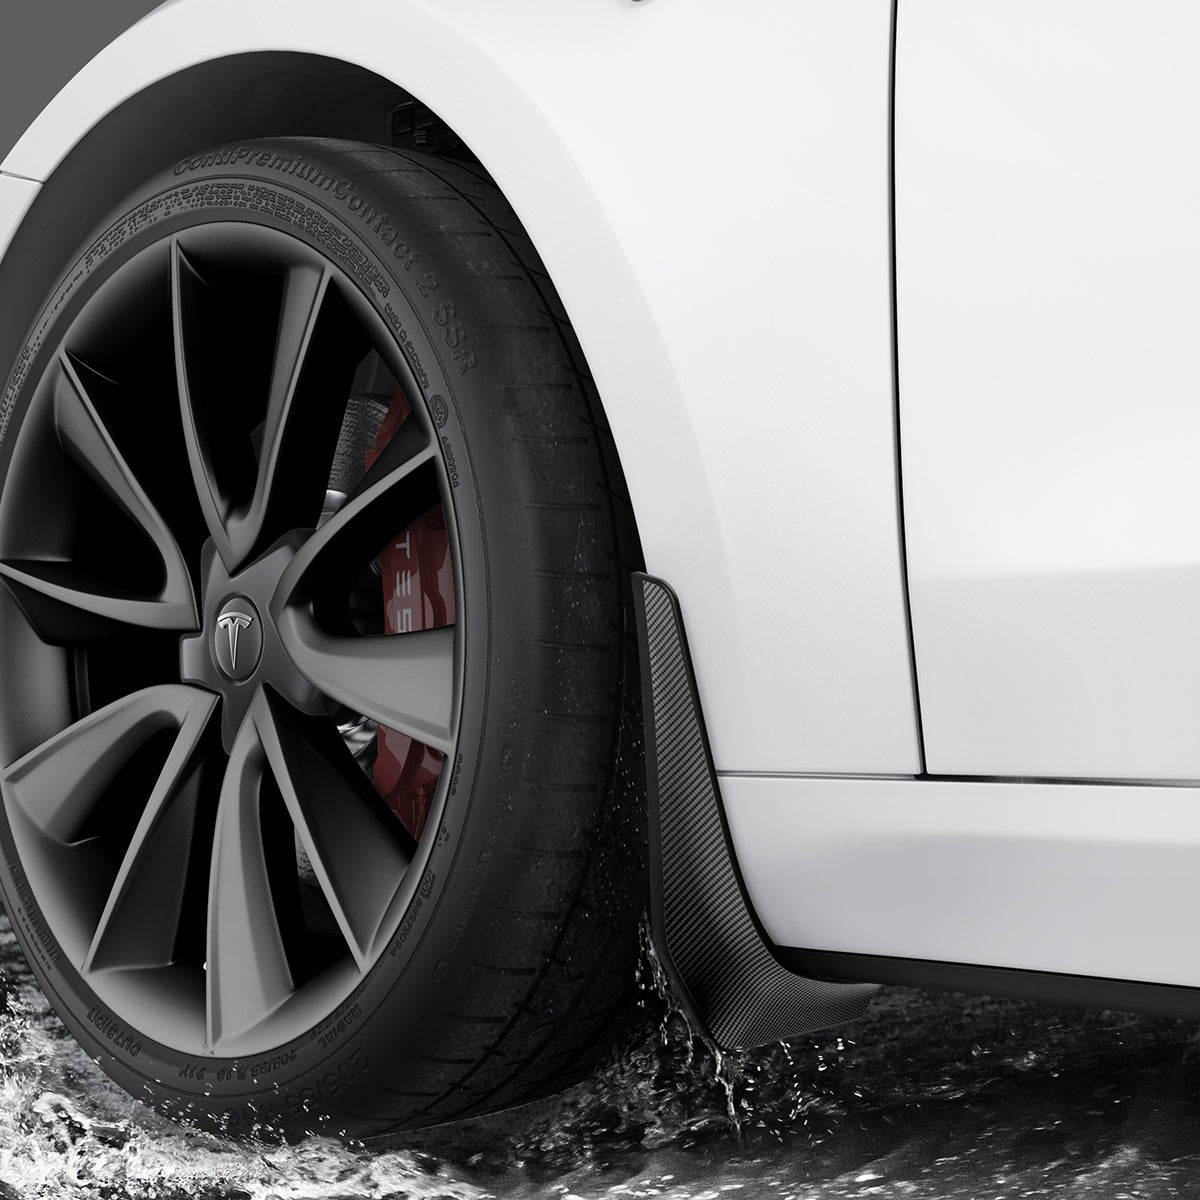 ACP04511 - Tesla Model 3 WeatherBloc Mud Flaps showing the mud flaps installed and water hitting it